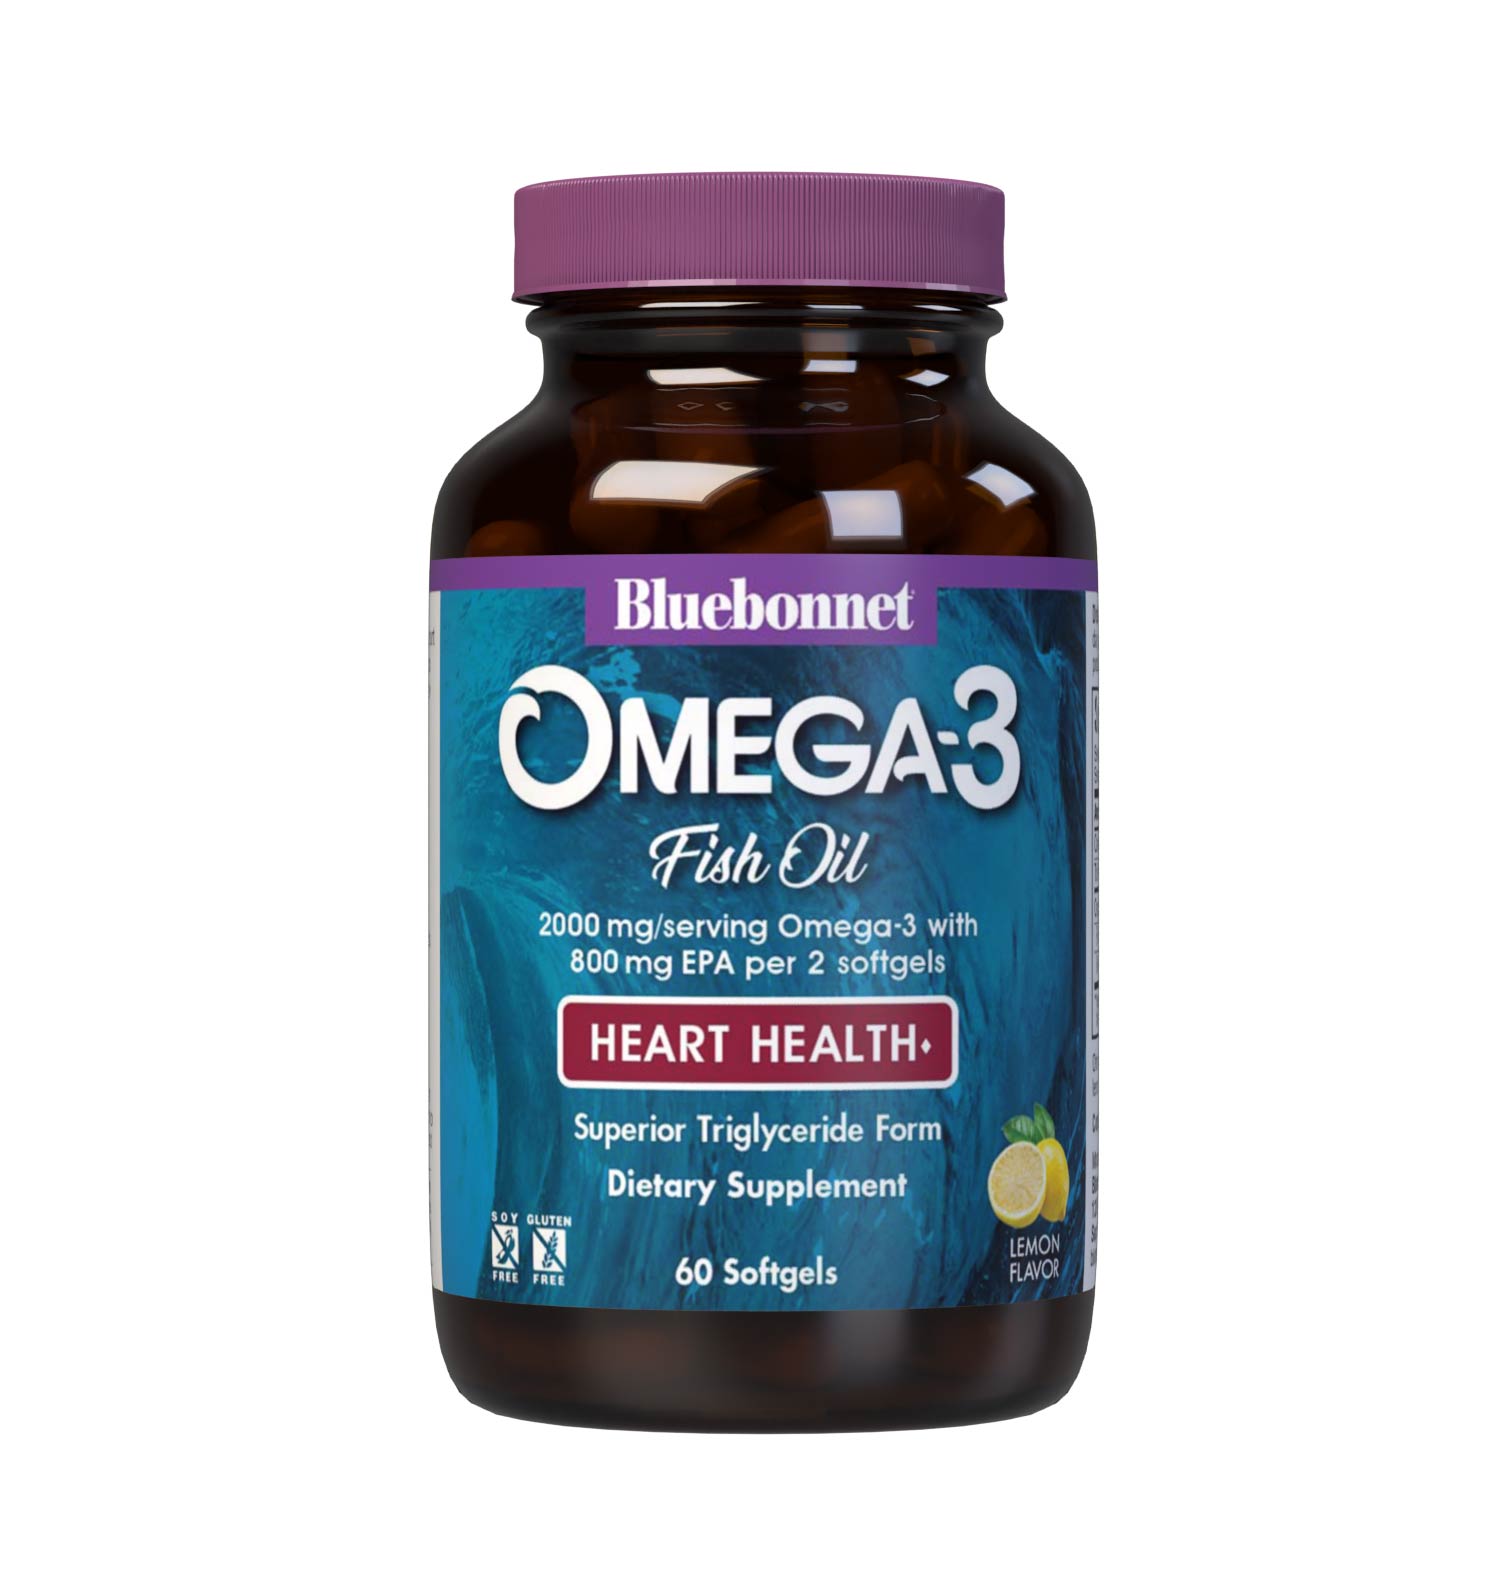 Bluebonnet’s Omega-3 Fish Oil Heart Health 60 Softgels are formulated with a specific ratio of EPA and DHA to help support heart function, blood flow, and blood pressure within the normal range by utilizing ultra-refined omega-3s from wild-caught fish. #size_60 count